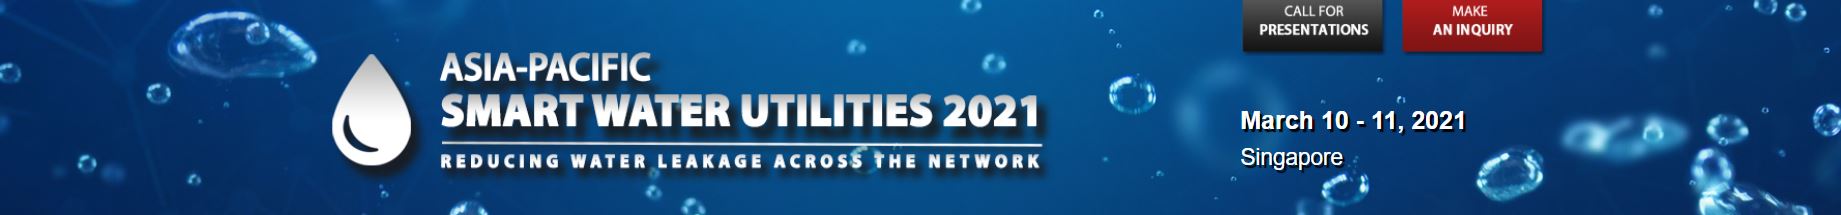 Physical Conference - ASIA-PACIFIC SMART WATER UTILITIES 2021, Singapore